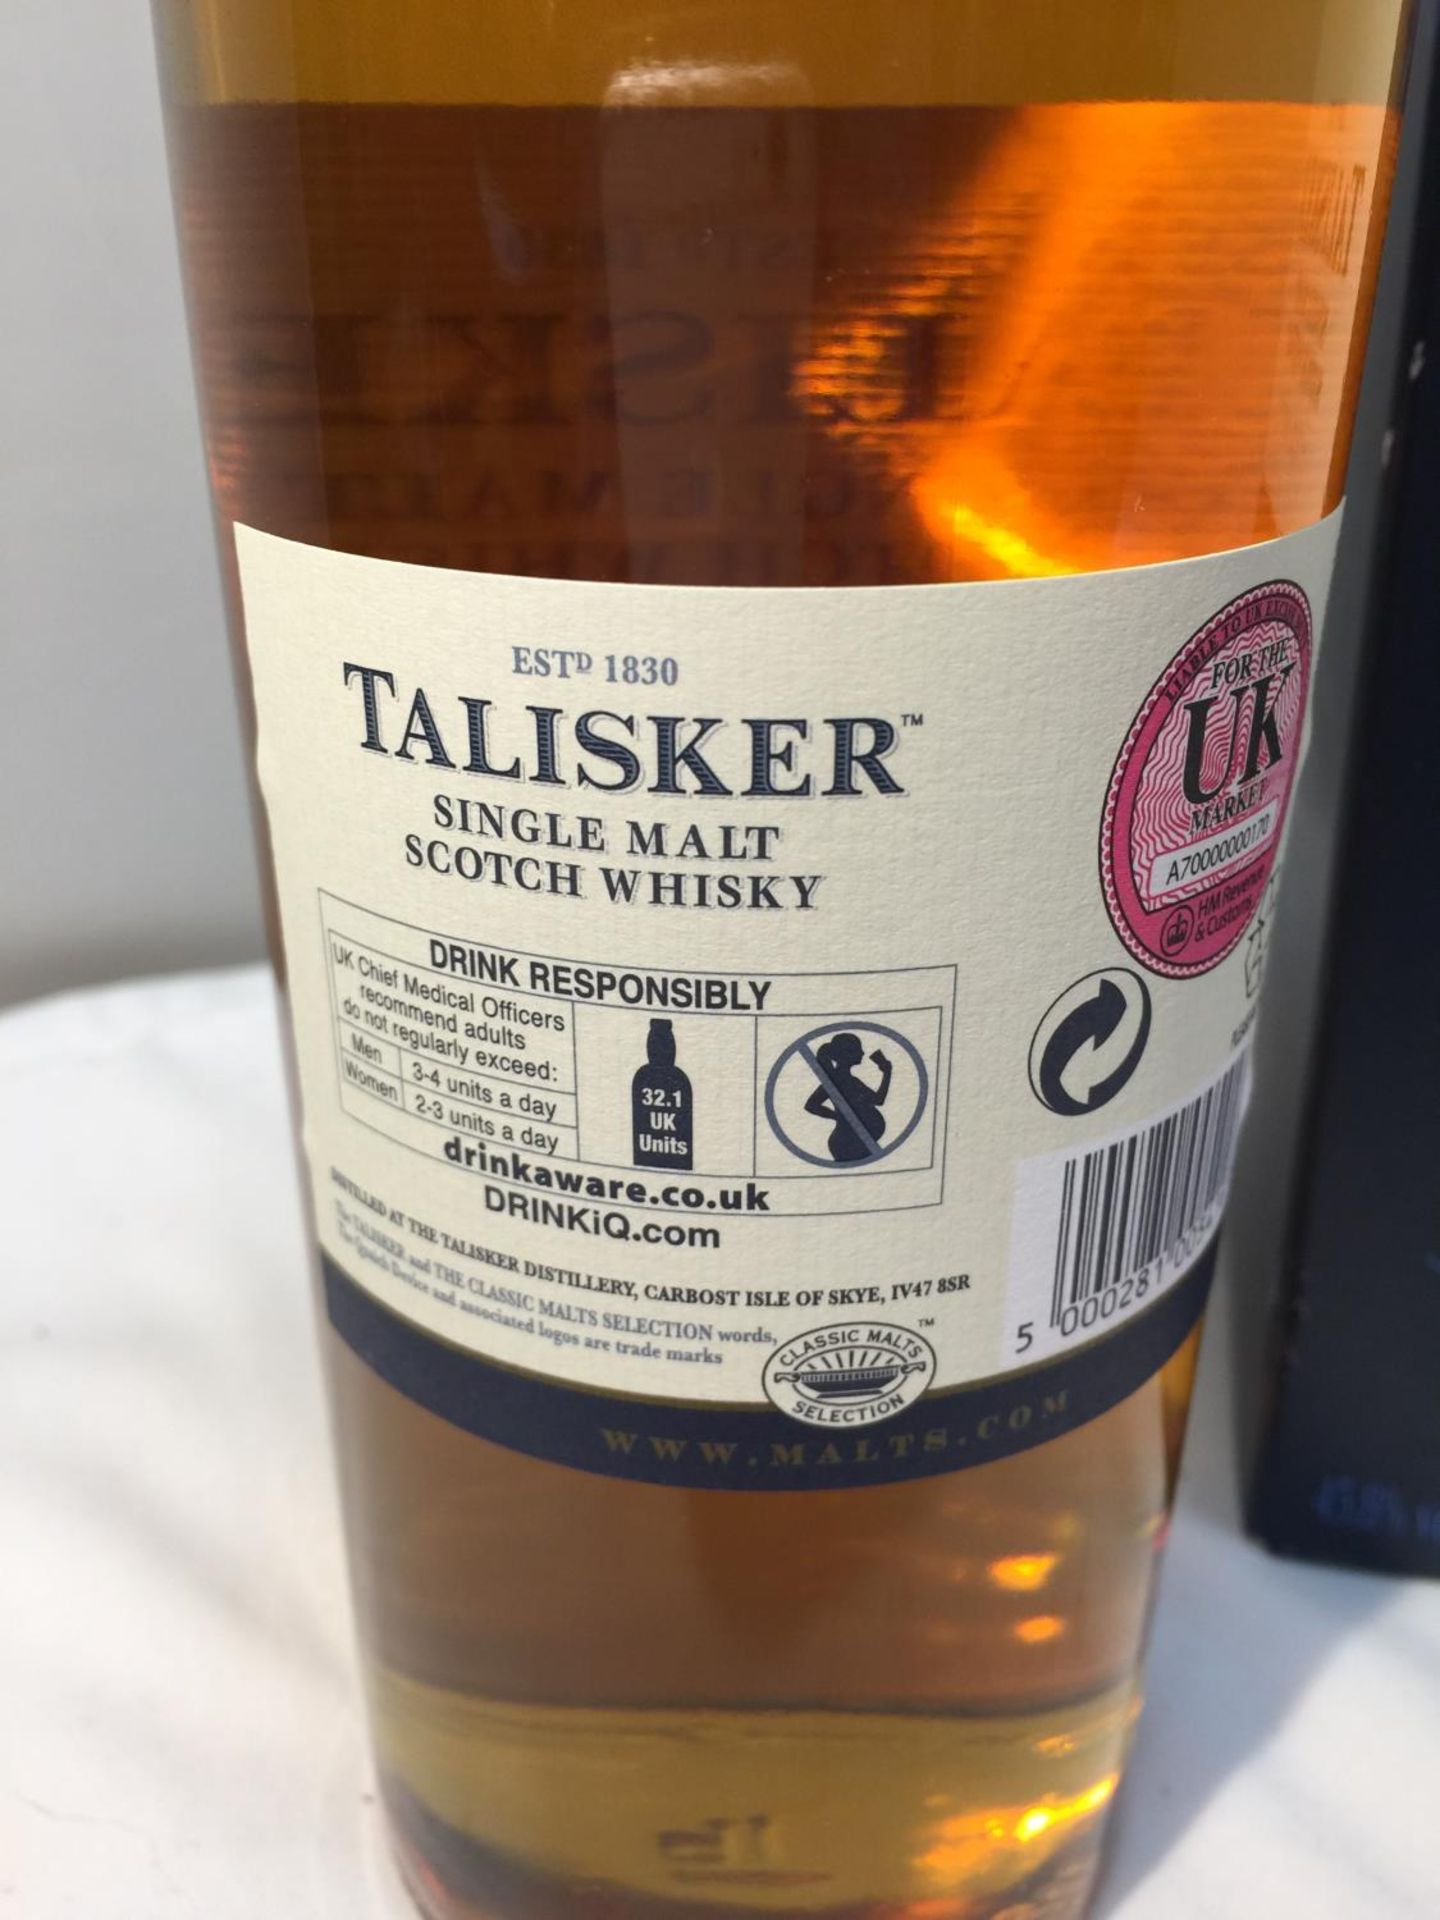 A 70CL BOTTLE OF TALISKER 10 YEAR AGED SINGLE MALT SCOTCH WHISKY 45.8% VOL IN BOX. PROCEEDS TO BE - Image 3 of 7